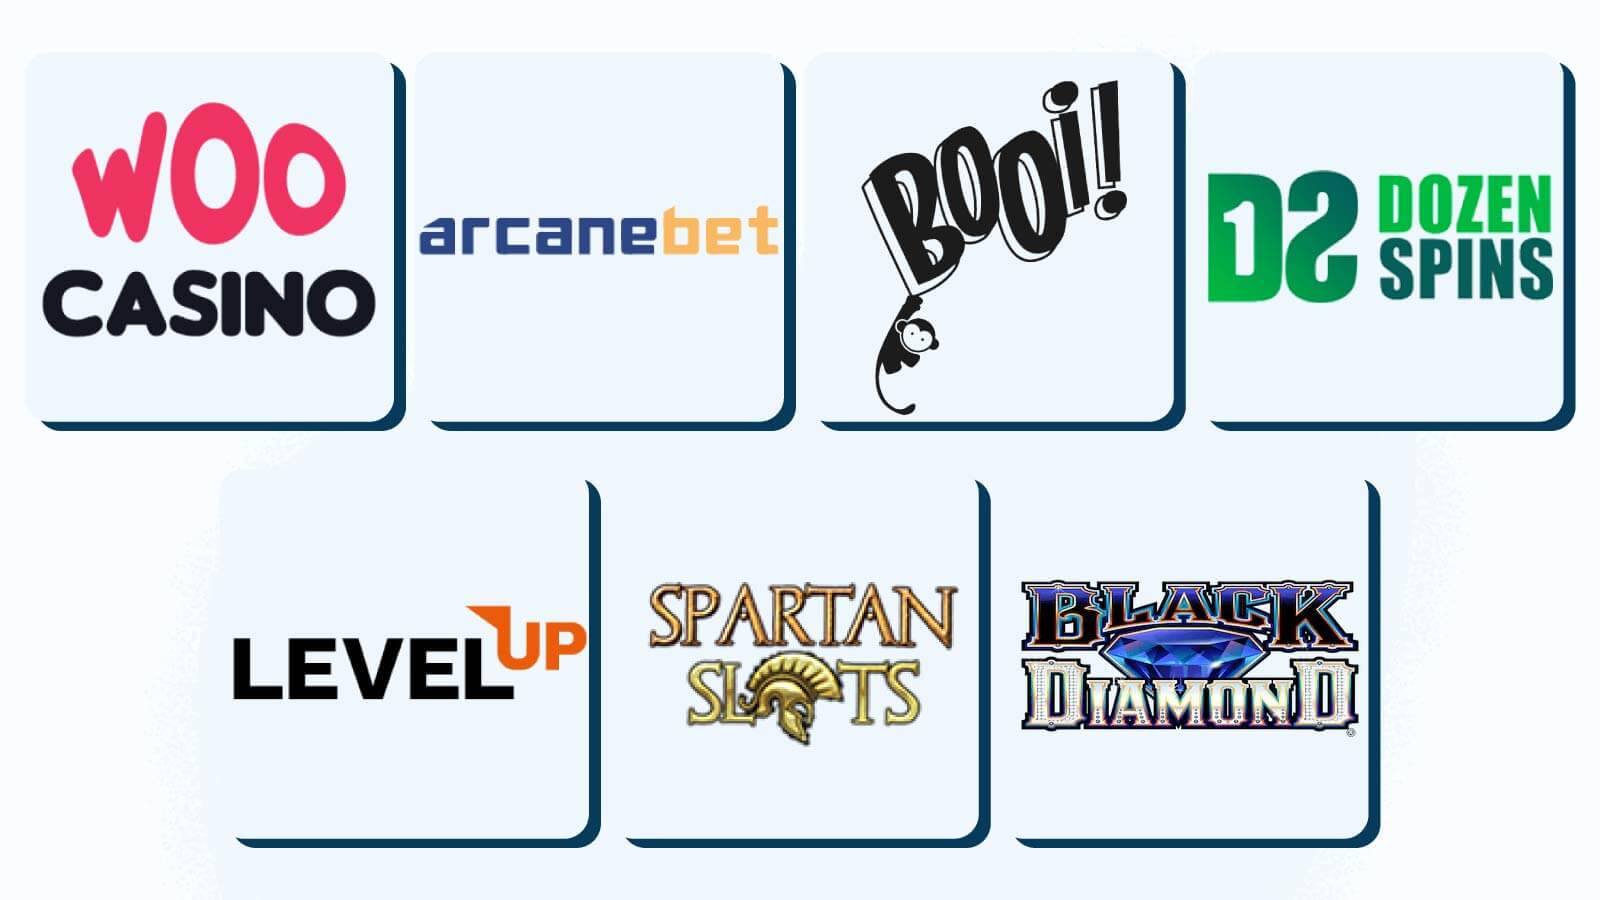 Your Ultimate 25 Free Spins No Deposit Casino List